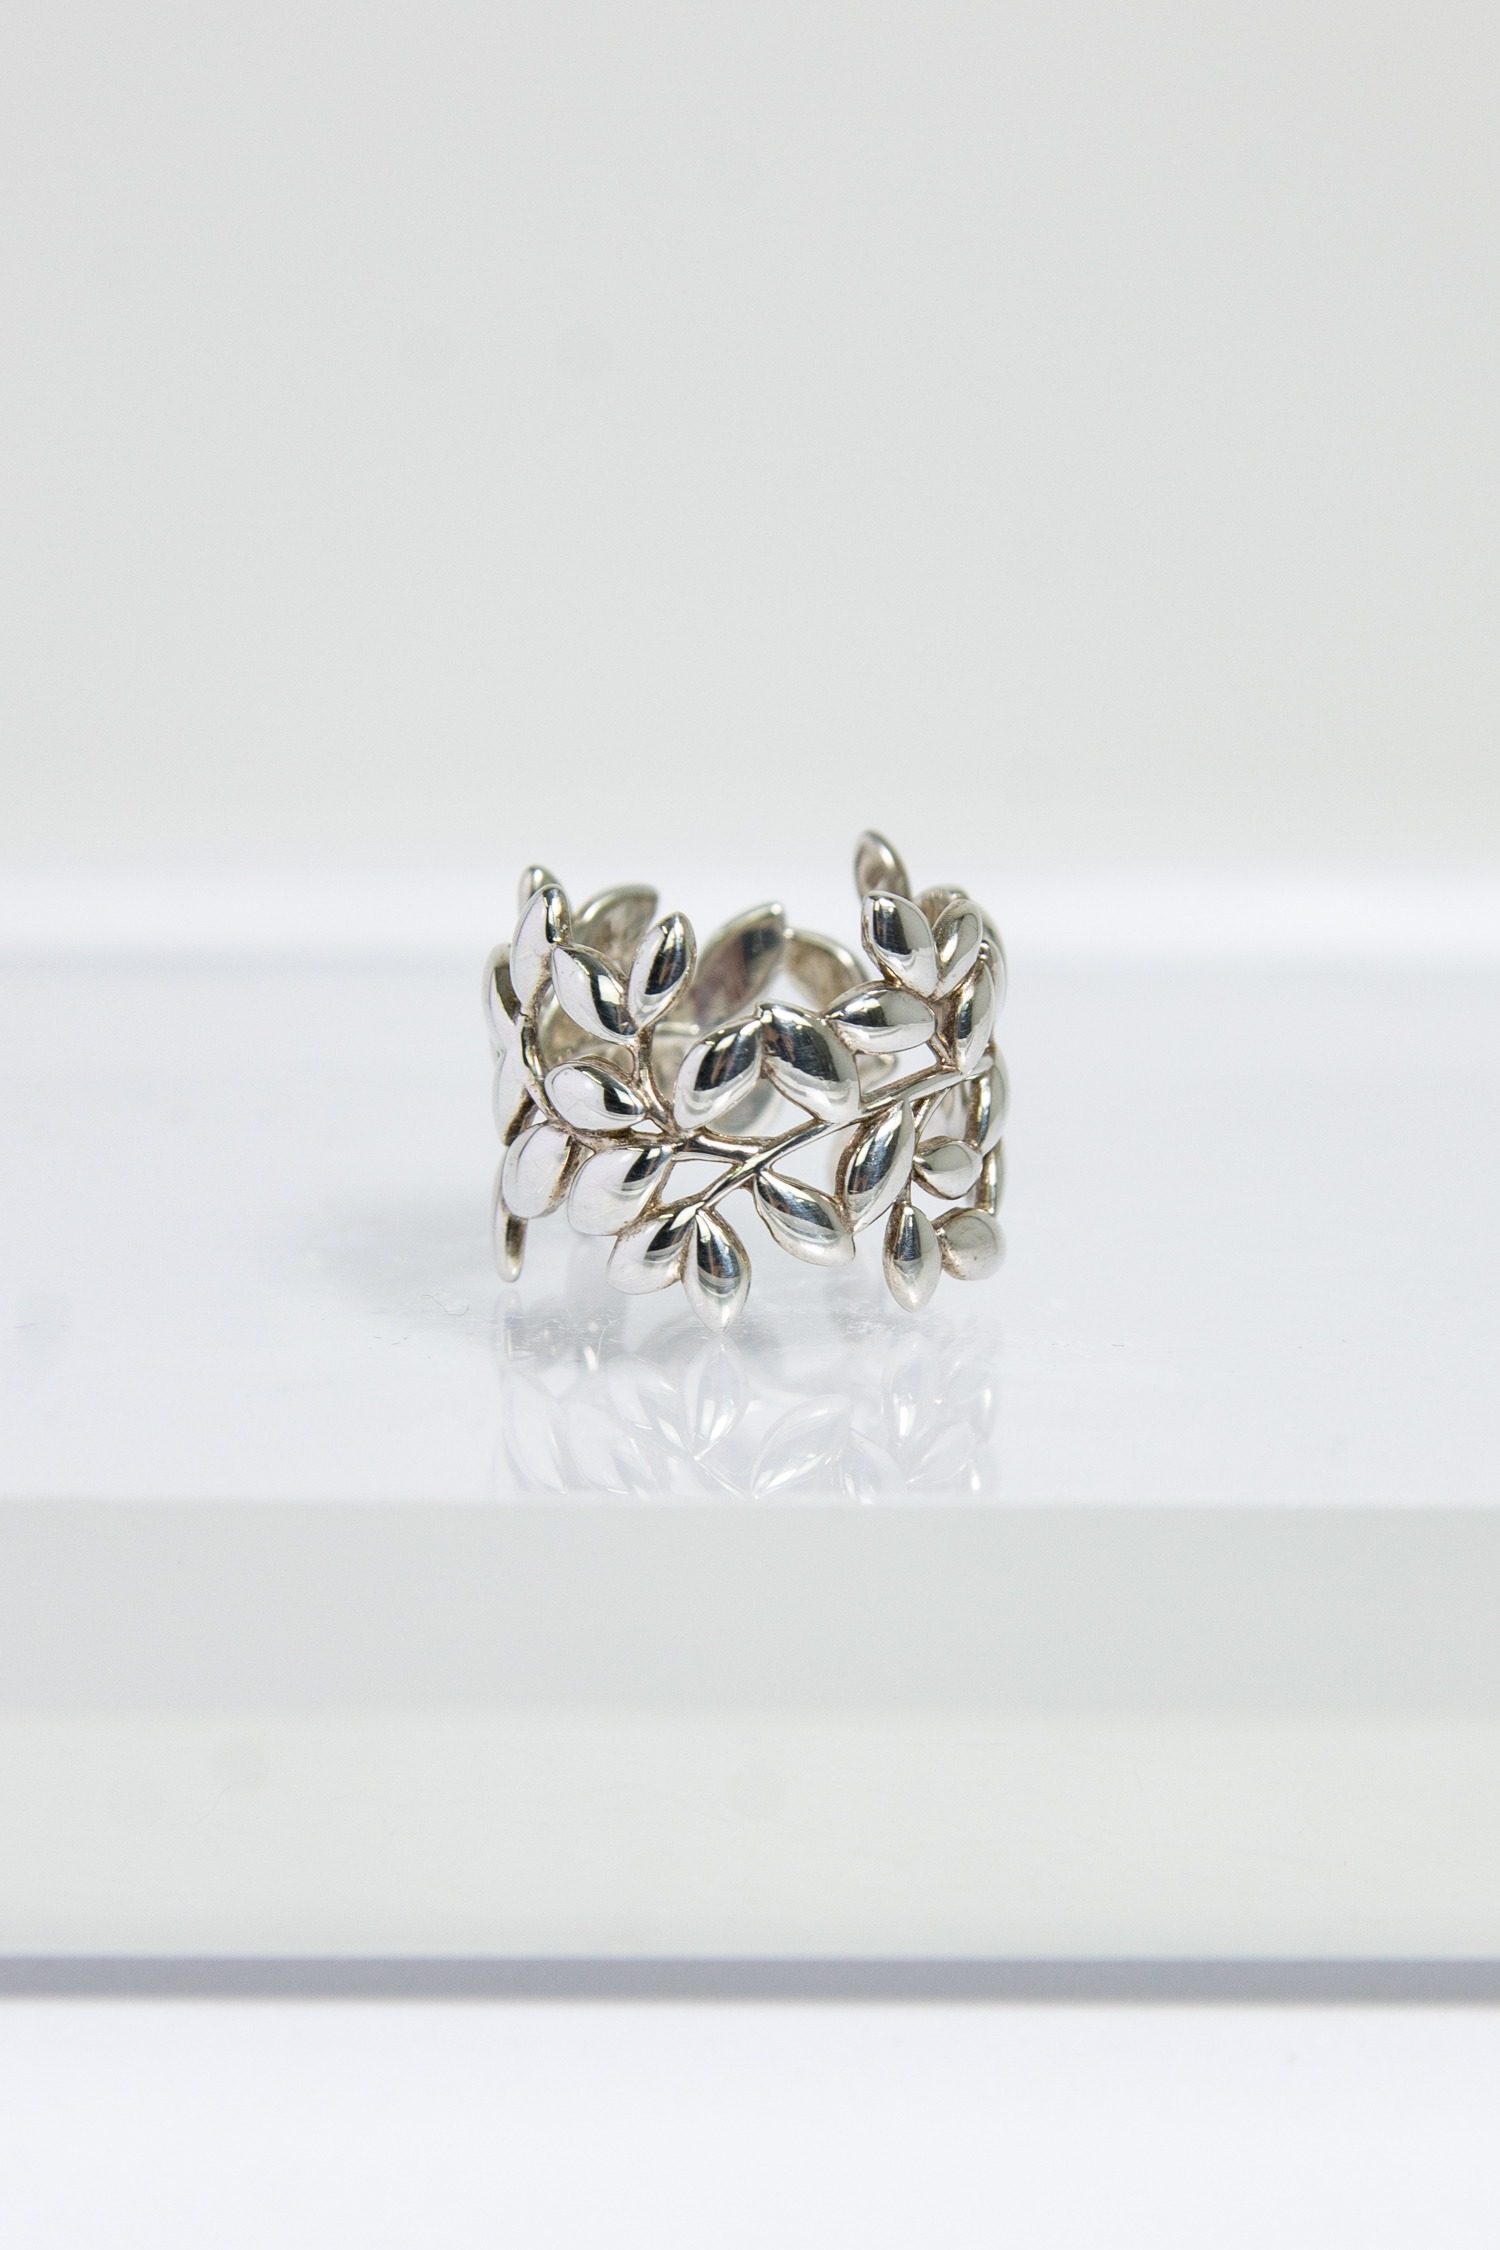 Tiffany & Co. Ring "Paloma Picasso" Olive Leaf in Silber